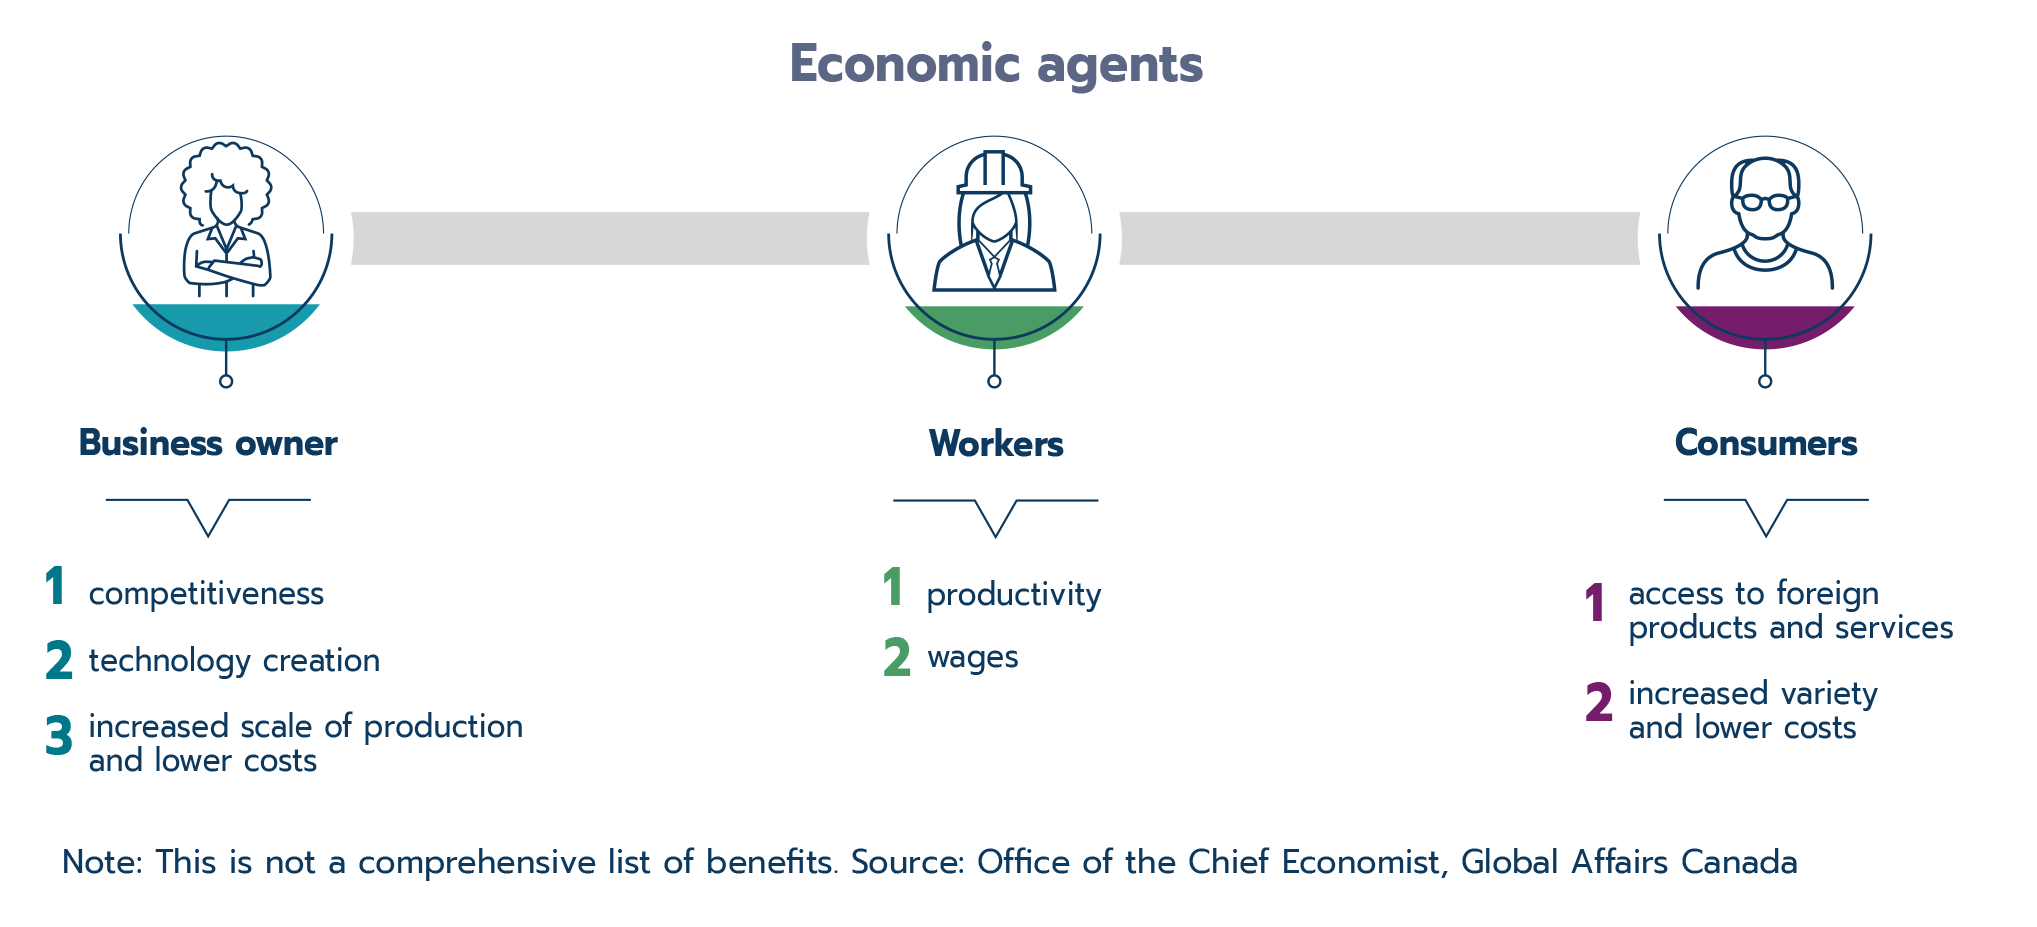 Figure 2.2: Economic agents and how they can benefit from trade